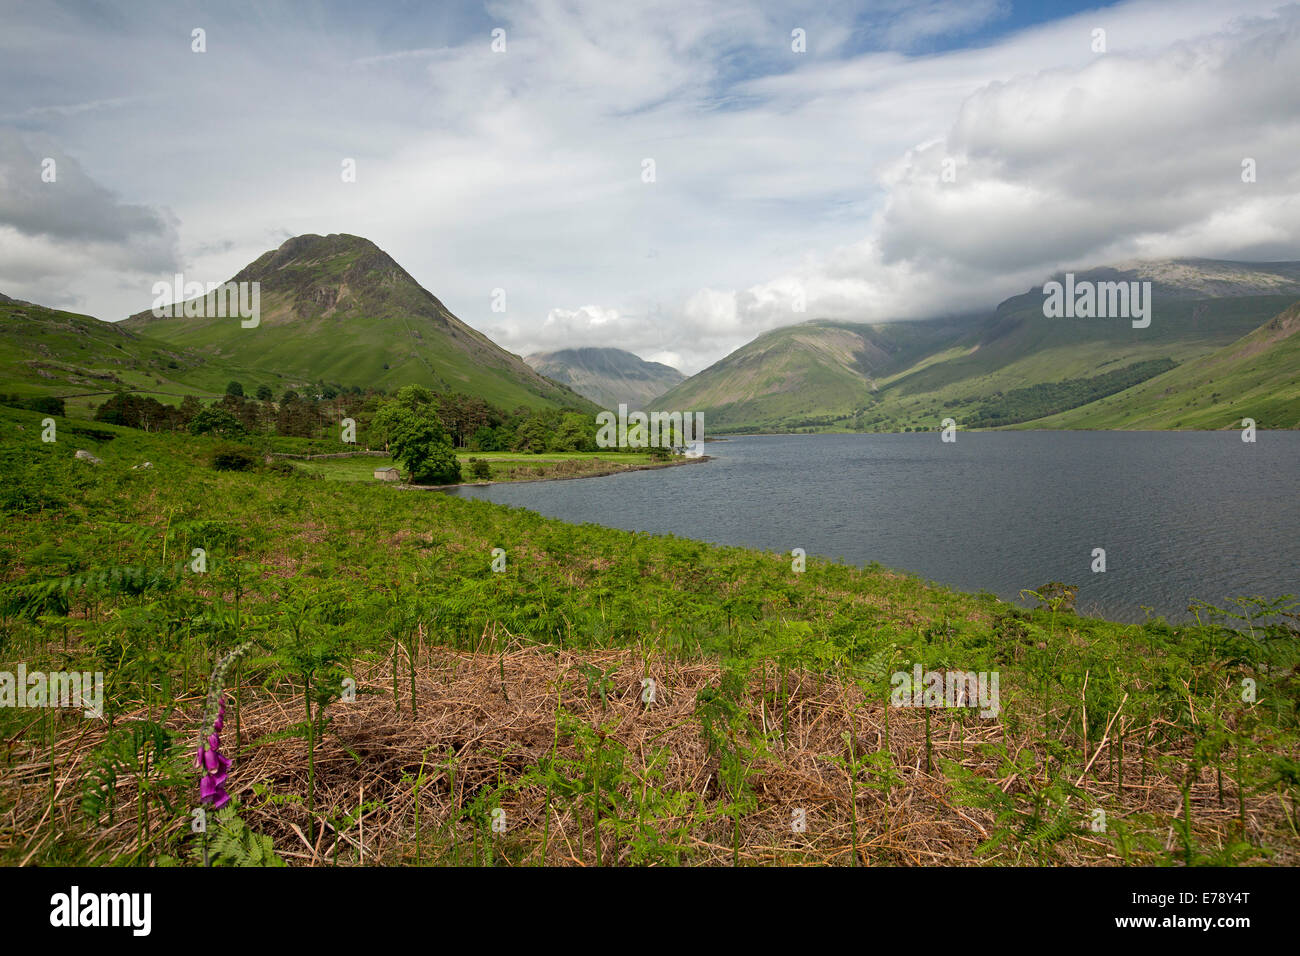 Wastwater lake surrounded by mountain peaks coated with green vegetation, draped with low cloud, Lake District, Cumbria, England Stock Photo